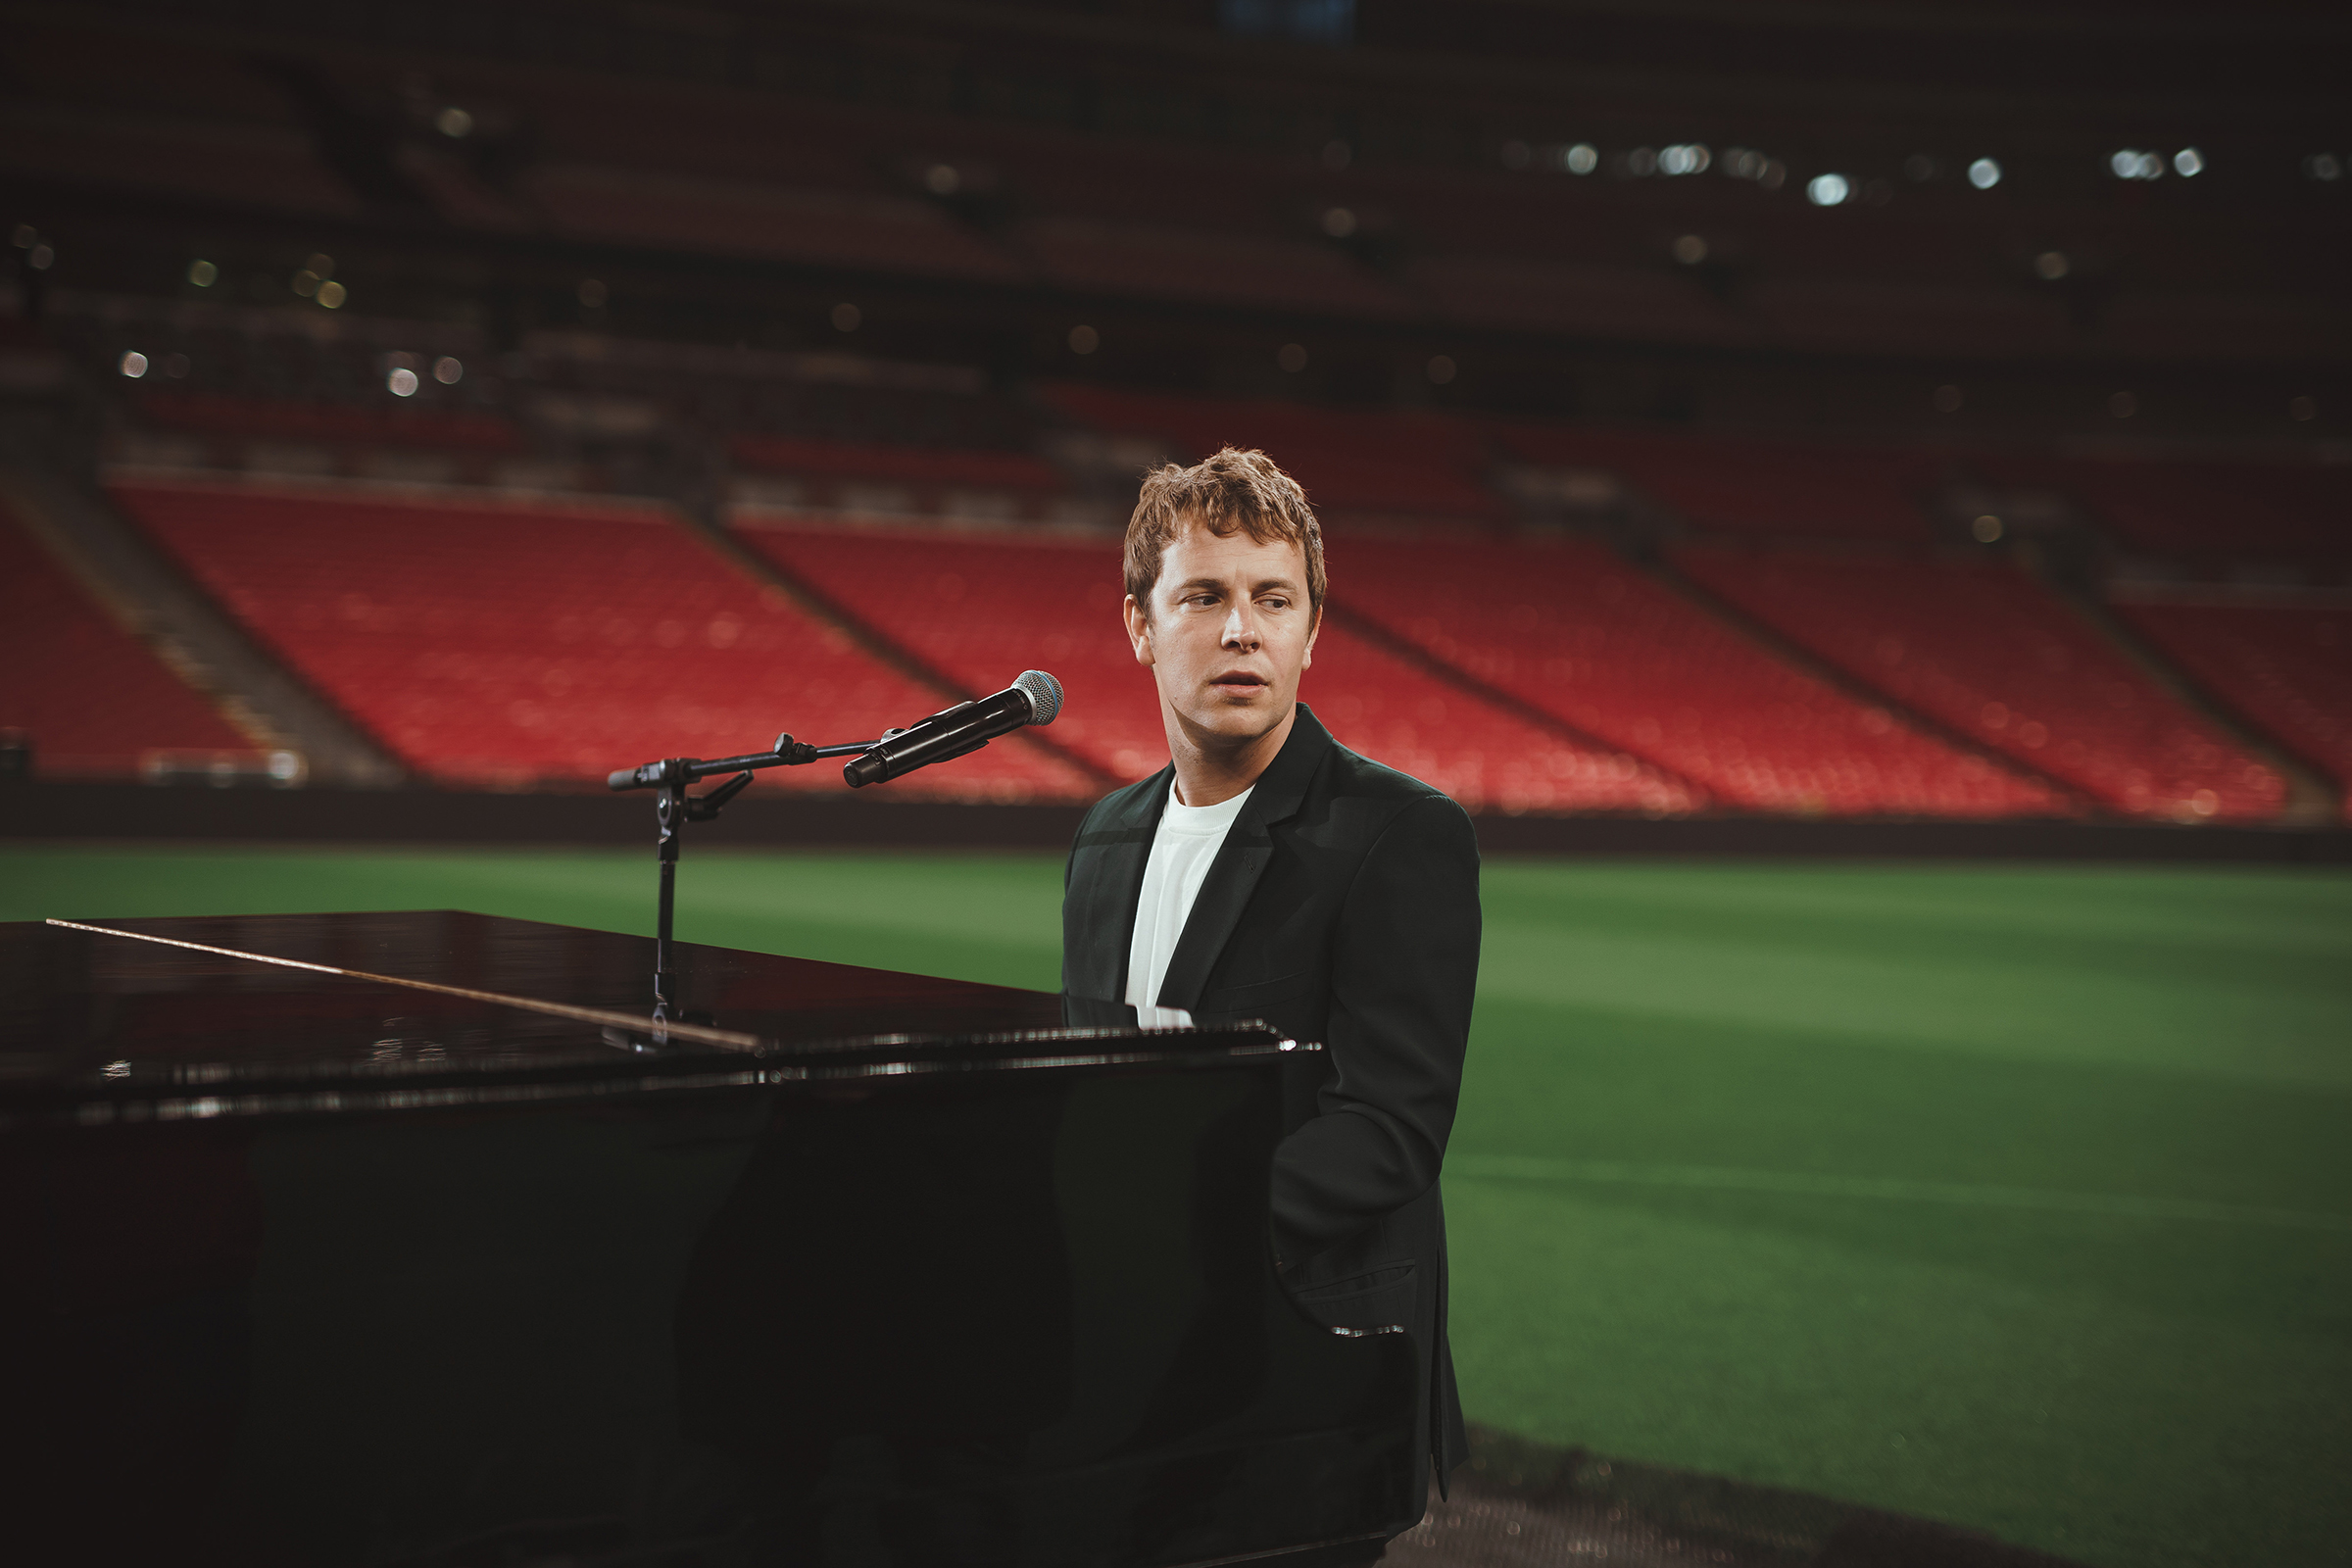 TOM ODELL releases the video for his new single “lose you again” shot in Wembley stadium 